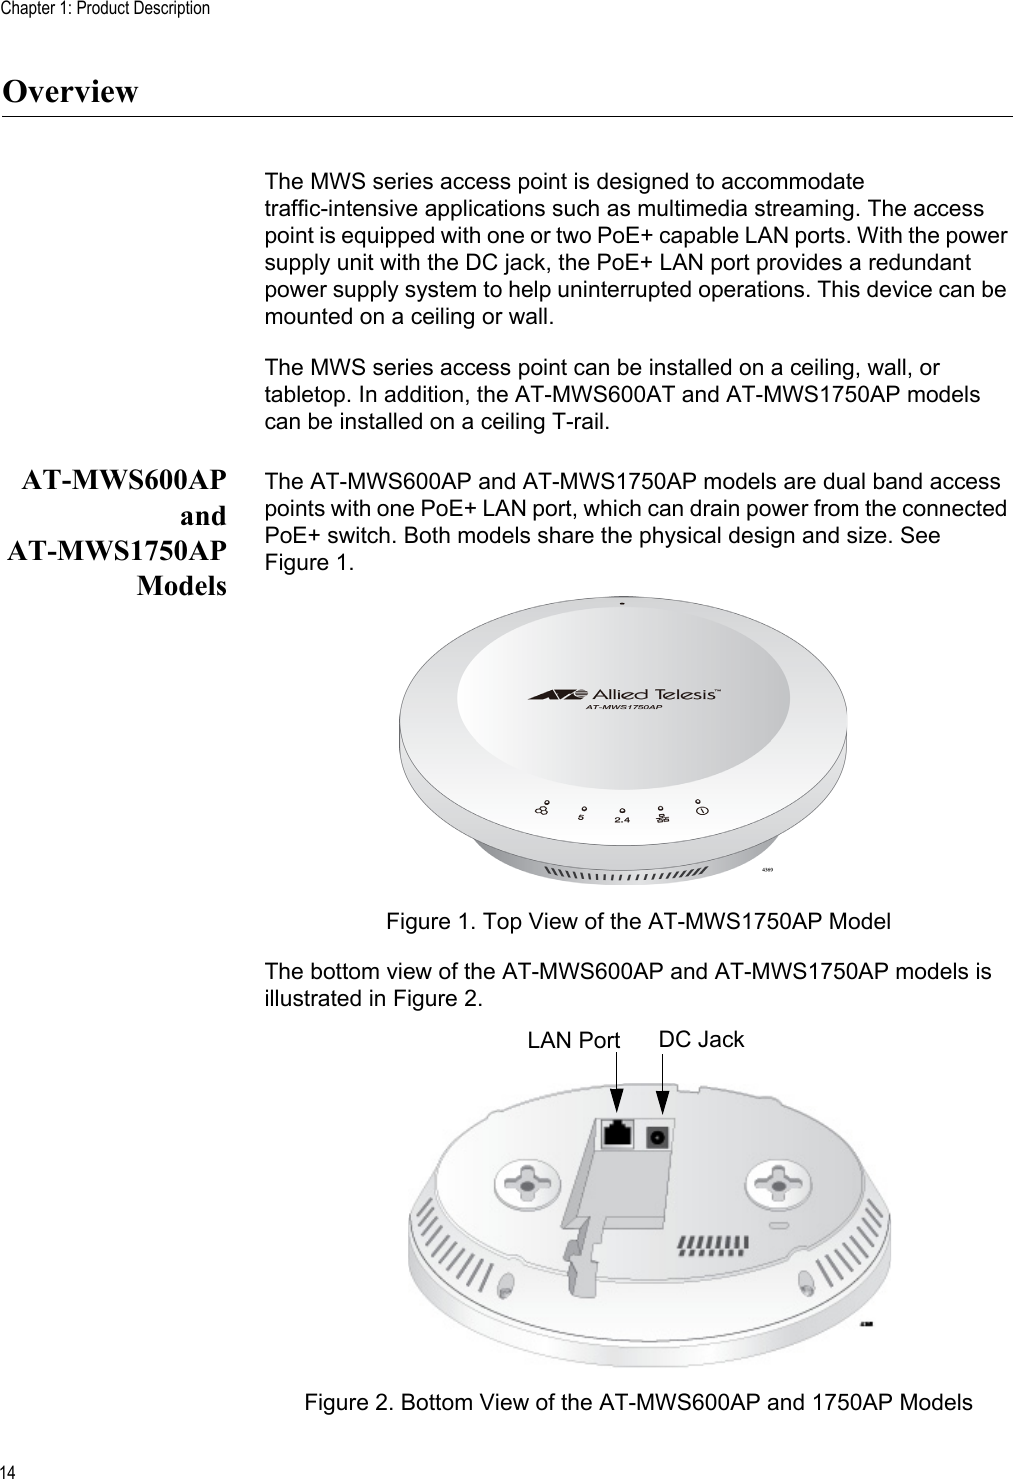 Chapter 1: Product Description14OverviewThe MWS series access point is designed to accommodate traffic-intensive applications such as multimedia streaming. The access point is equipped with one or two PoE+ capable LAN ports. With the power supply unit with the DC jack, the PoE+ LAN port provides a redundant power supply system to help uninterrupted operations. This device can be mounted on a ceiling or wall.The MWS series access point can be installed on a ceiling, wall, or tabletop. In addition, the AT-MWS600AT and AT-MWS1750AP models can be installed on a ceiling T-rail.AT-MWS600APandAT-MWS1750APModelsThe AT-MWS600AP and AT-MWS1750AP models are dual band access points with one PoE+ LAN port, which can drain power from the connected PoE+ switch. Both models share the physical design and size. See Figure 1.Figure 1. Top View of the AT-MWS1750AP ModelThe bottom view of the AT-MWS600AP and AT-MWS1750AP models is illustrated in Figure 2.Figure 2. Bottom View of the AT-MWS600AP and 1750AP ModelsLAN Port DC Jack